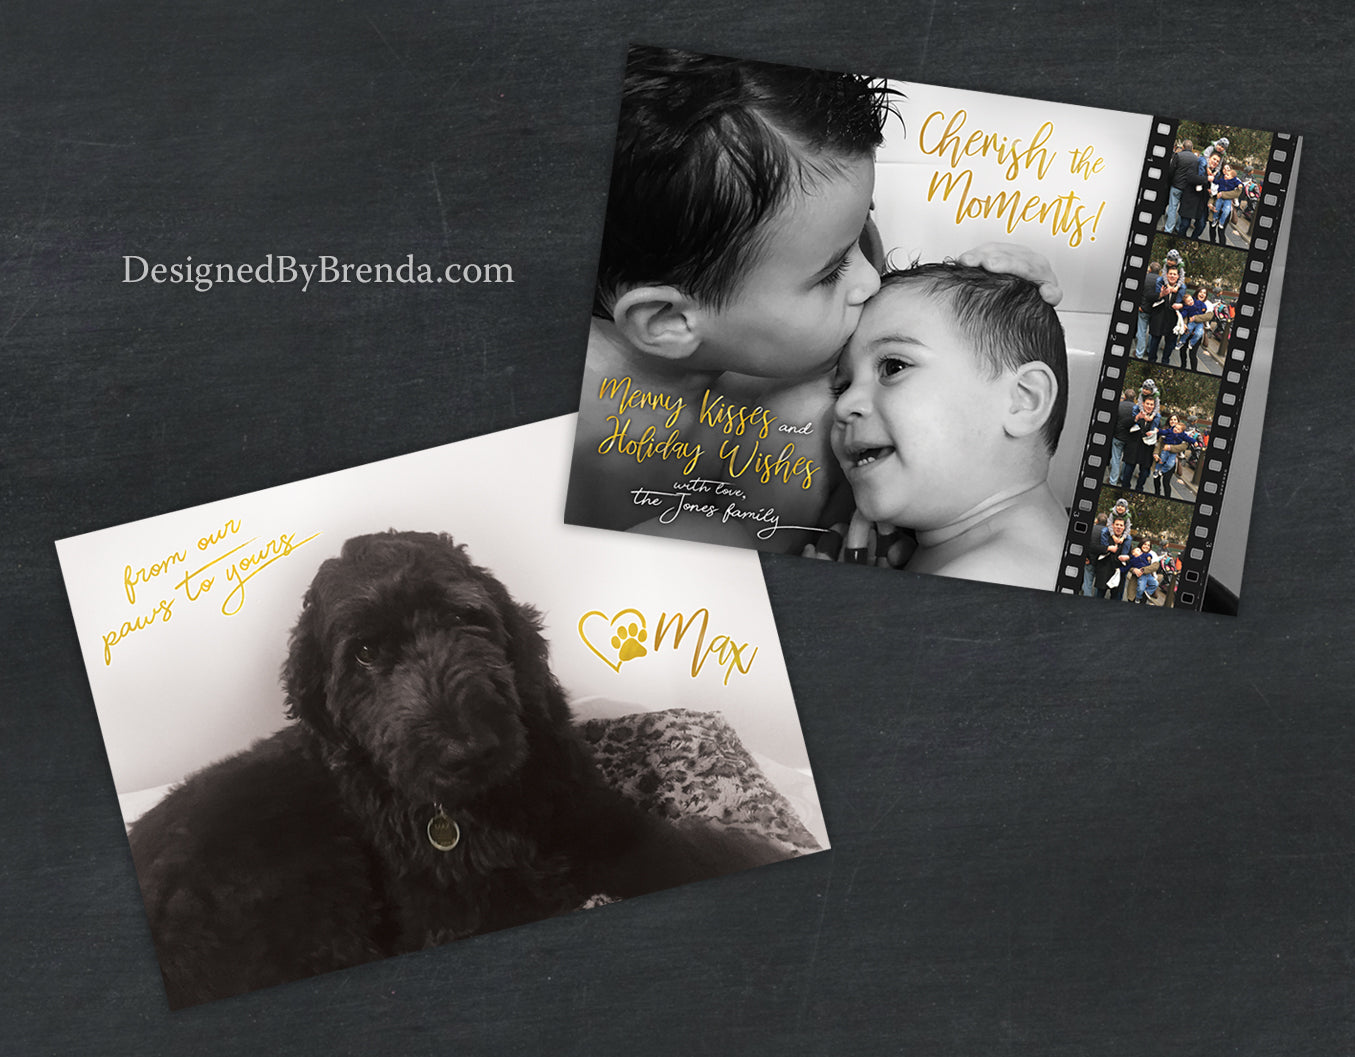 Cherish the Moments Holiday Photo Card - Merry Kisses and Holiday Wishes